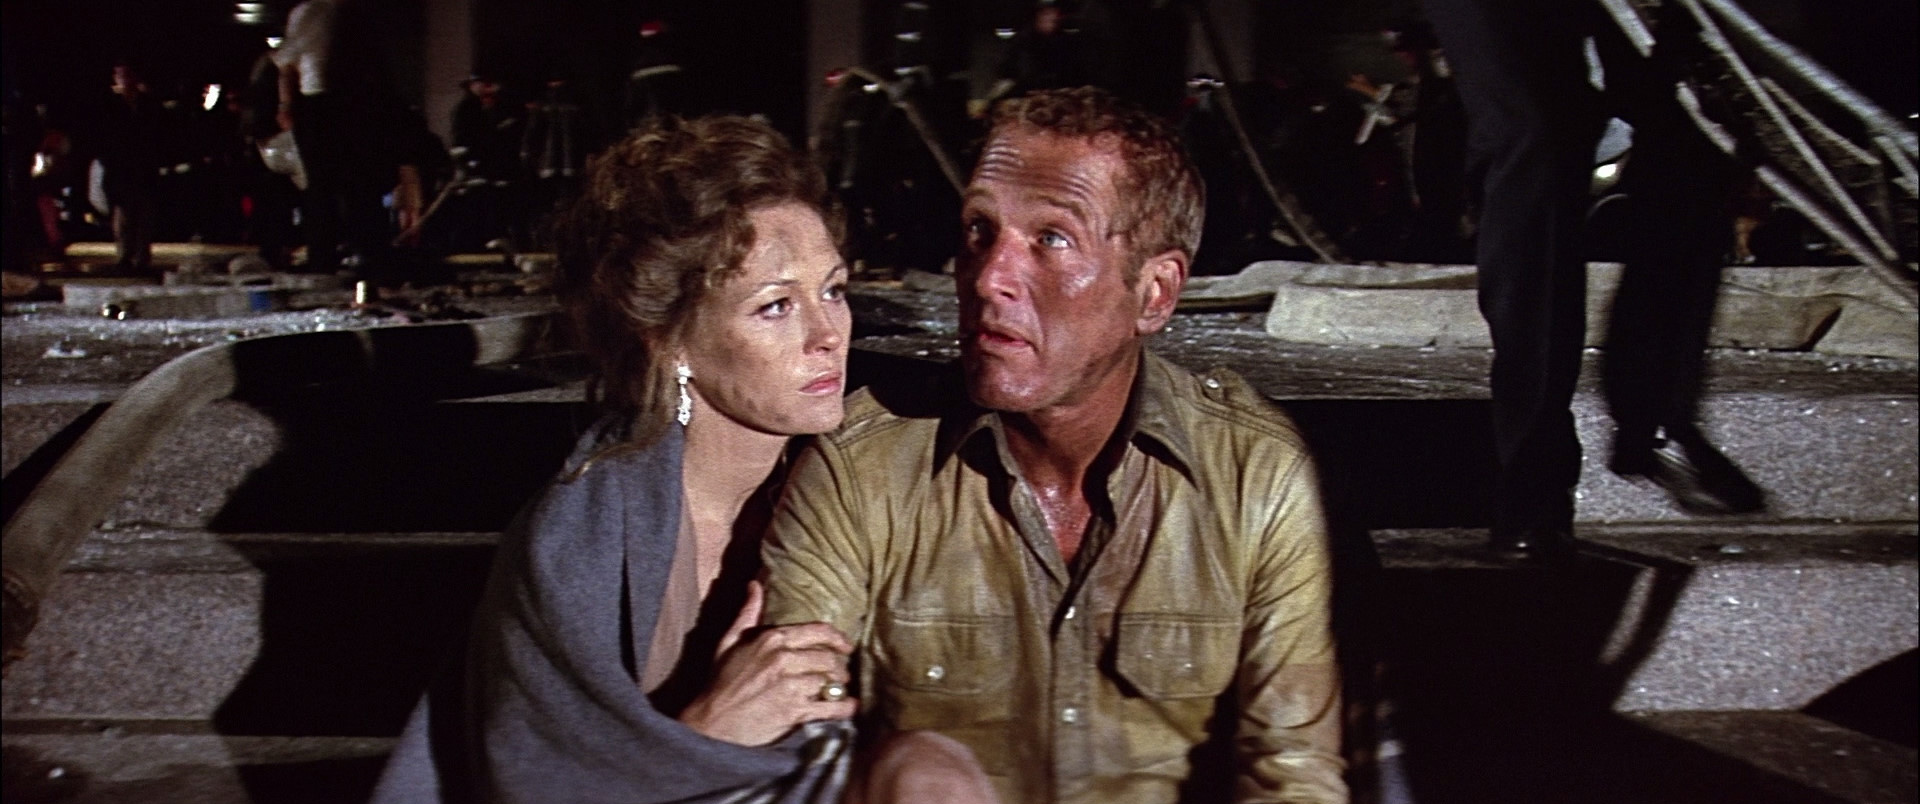 The Towering Inferno Backgrounds, Compatible - PC, Mobile, Gadgets| 1920x804 px